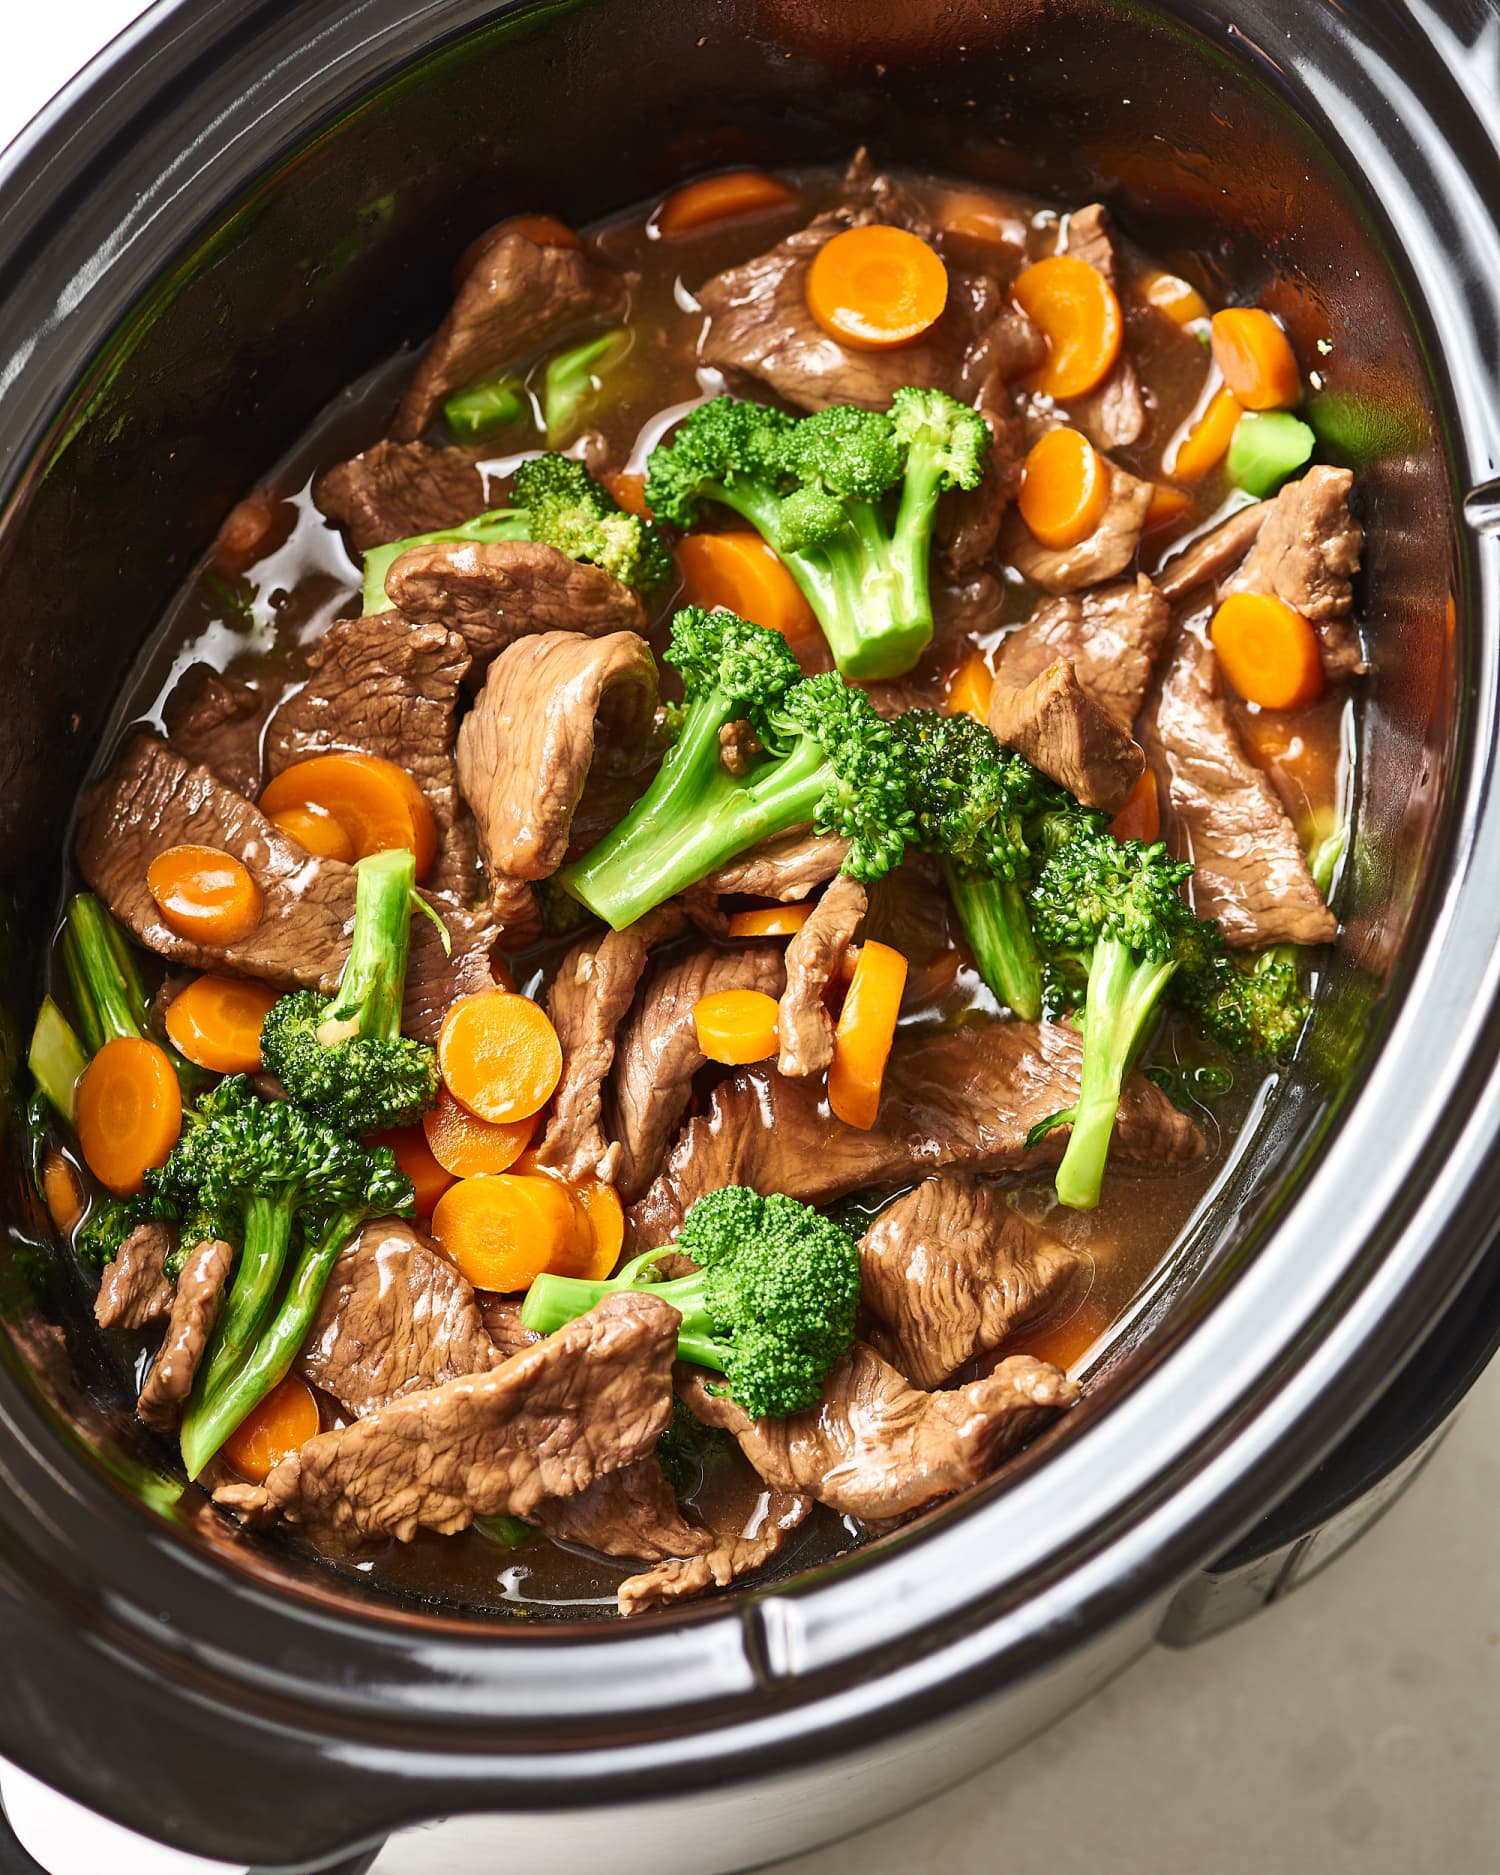 Slow Cooker Beef and Broccoli Thats Better Than Takeout | Kitchn